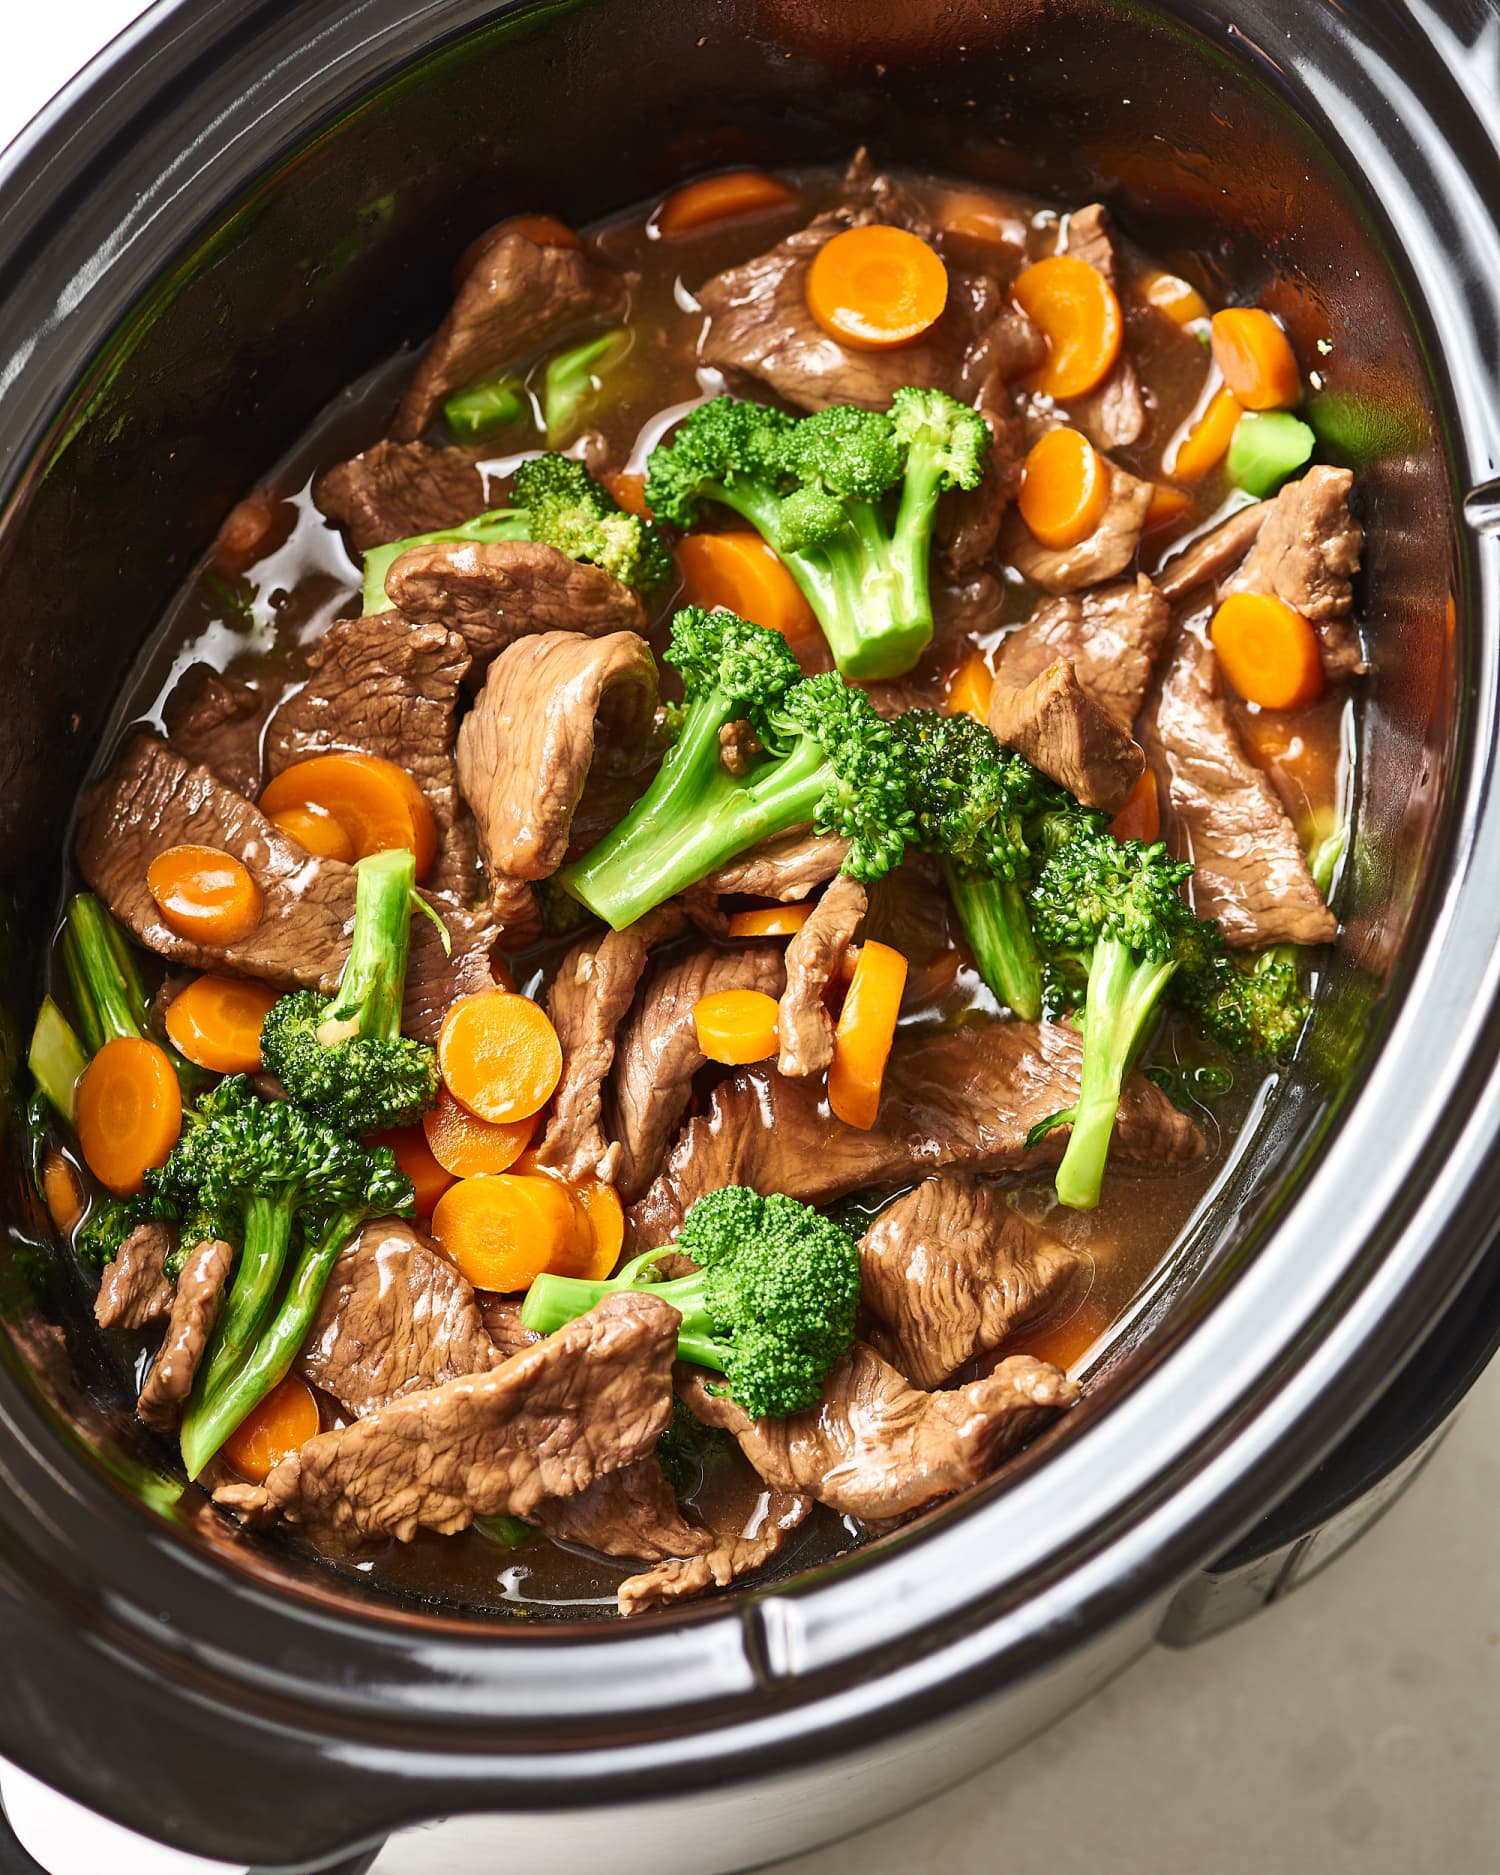 Slow Cooker Beef and Broccoli Thats Better Than Takeout | Kitchn